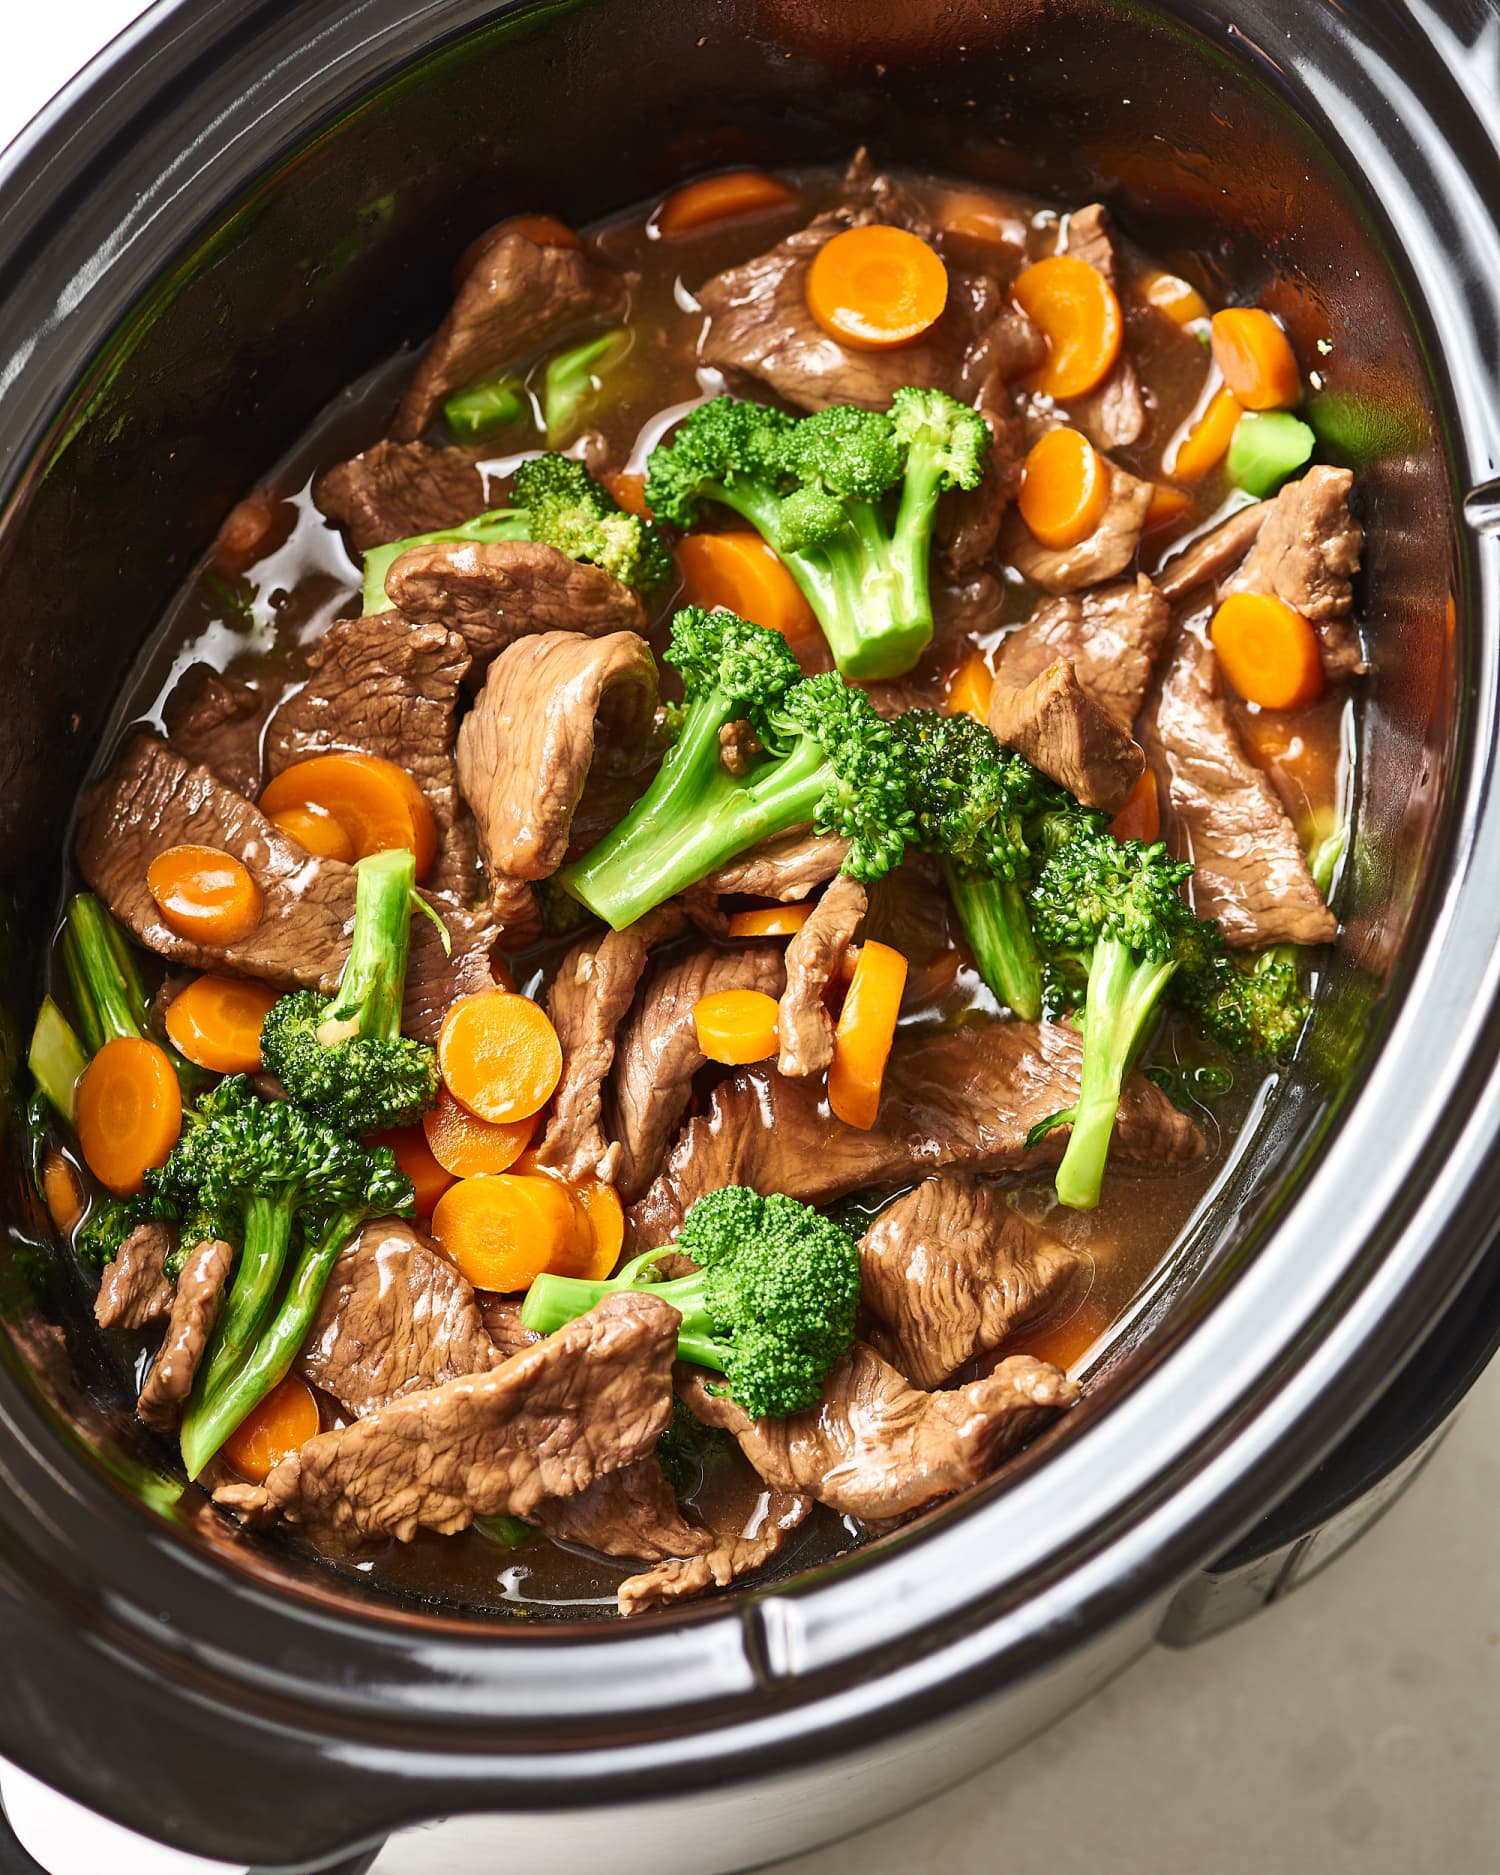 Slow Cooker Beef and Broccoli Thats Better Than Takeout | Kitchn